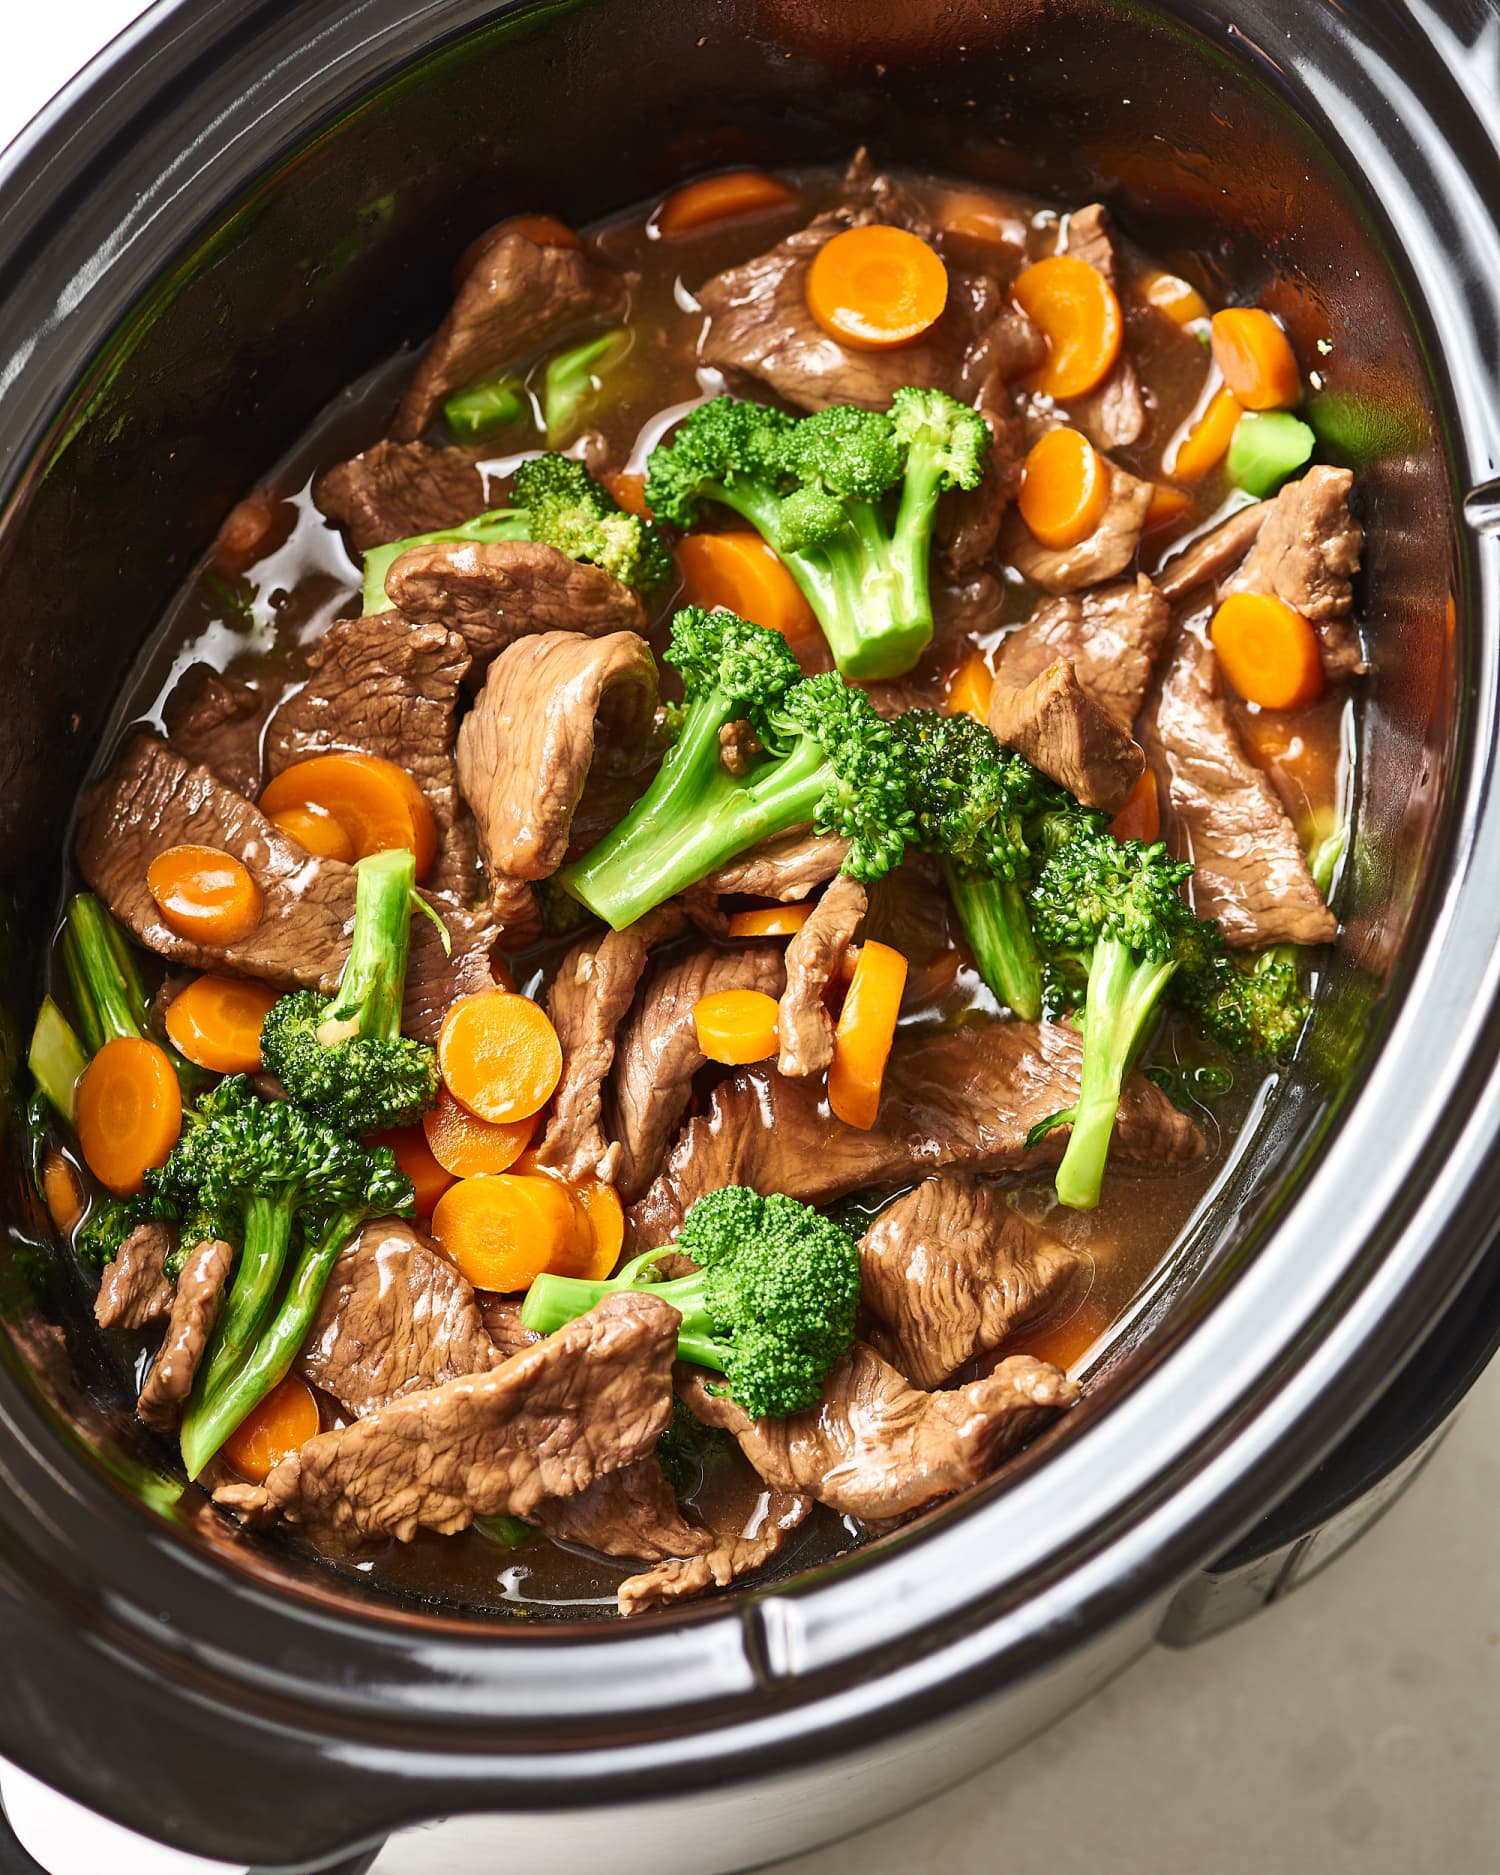 Slow Cooker Beef and Broccoli Thats Better Than Takeout | Kitchn